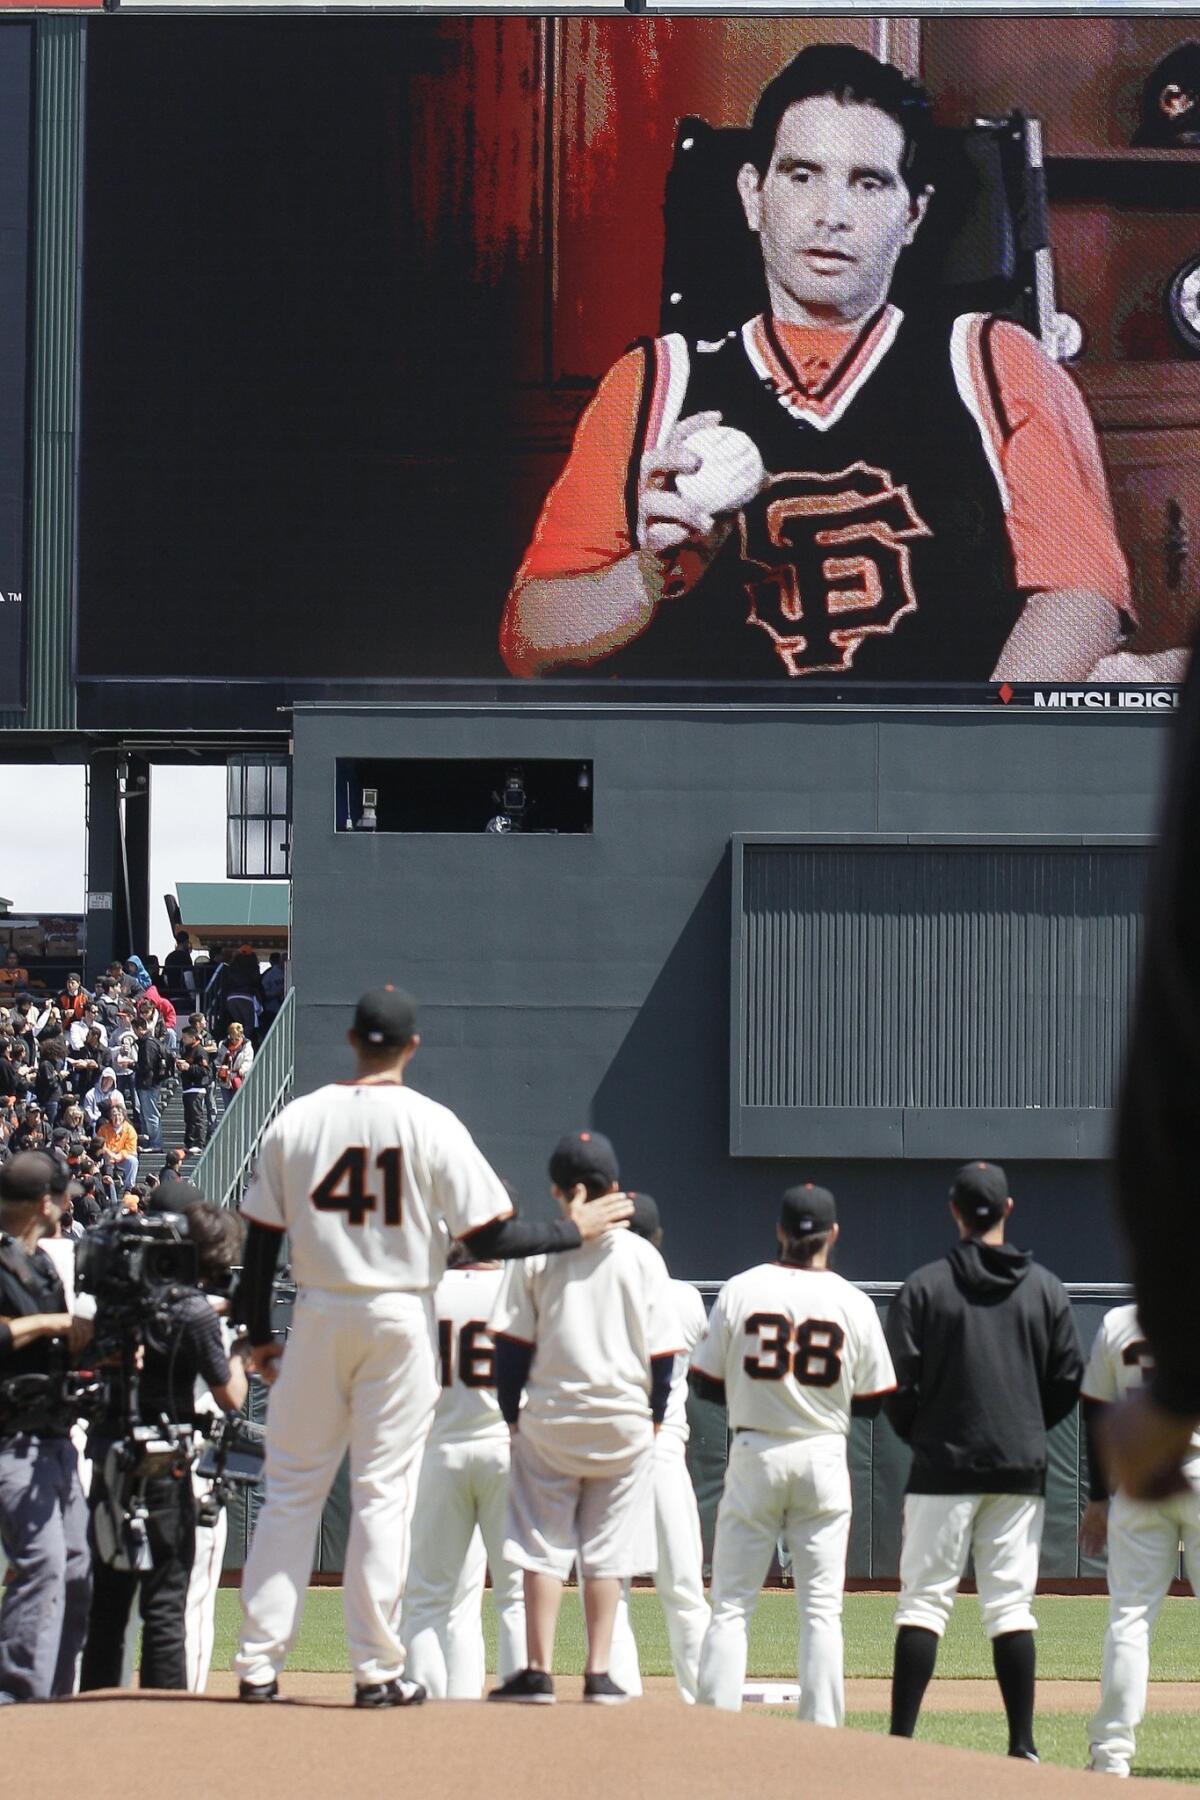 Bryan Stow appears on the big screen before the San Francisco Giants' 2012 home opener. Tyler Stow threw out the first pitch.